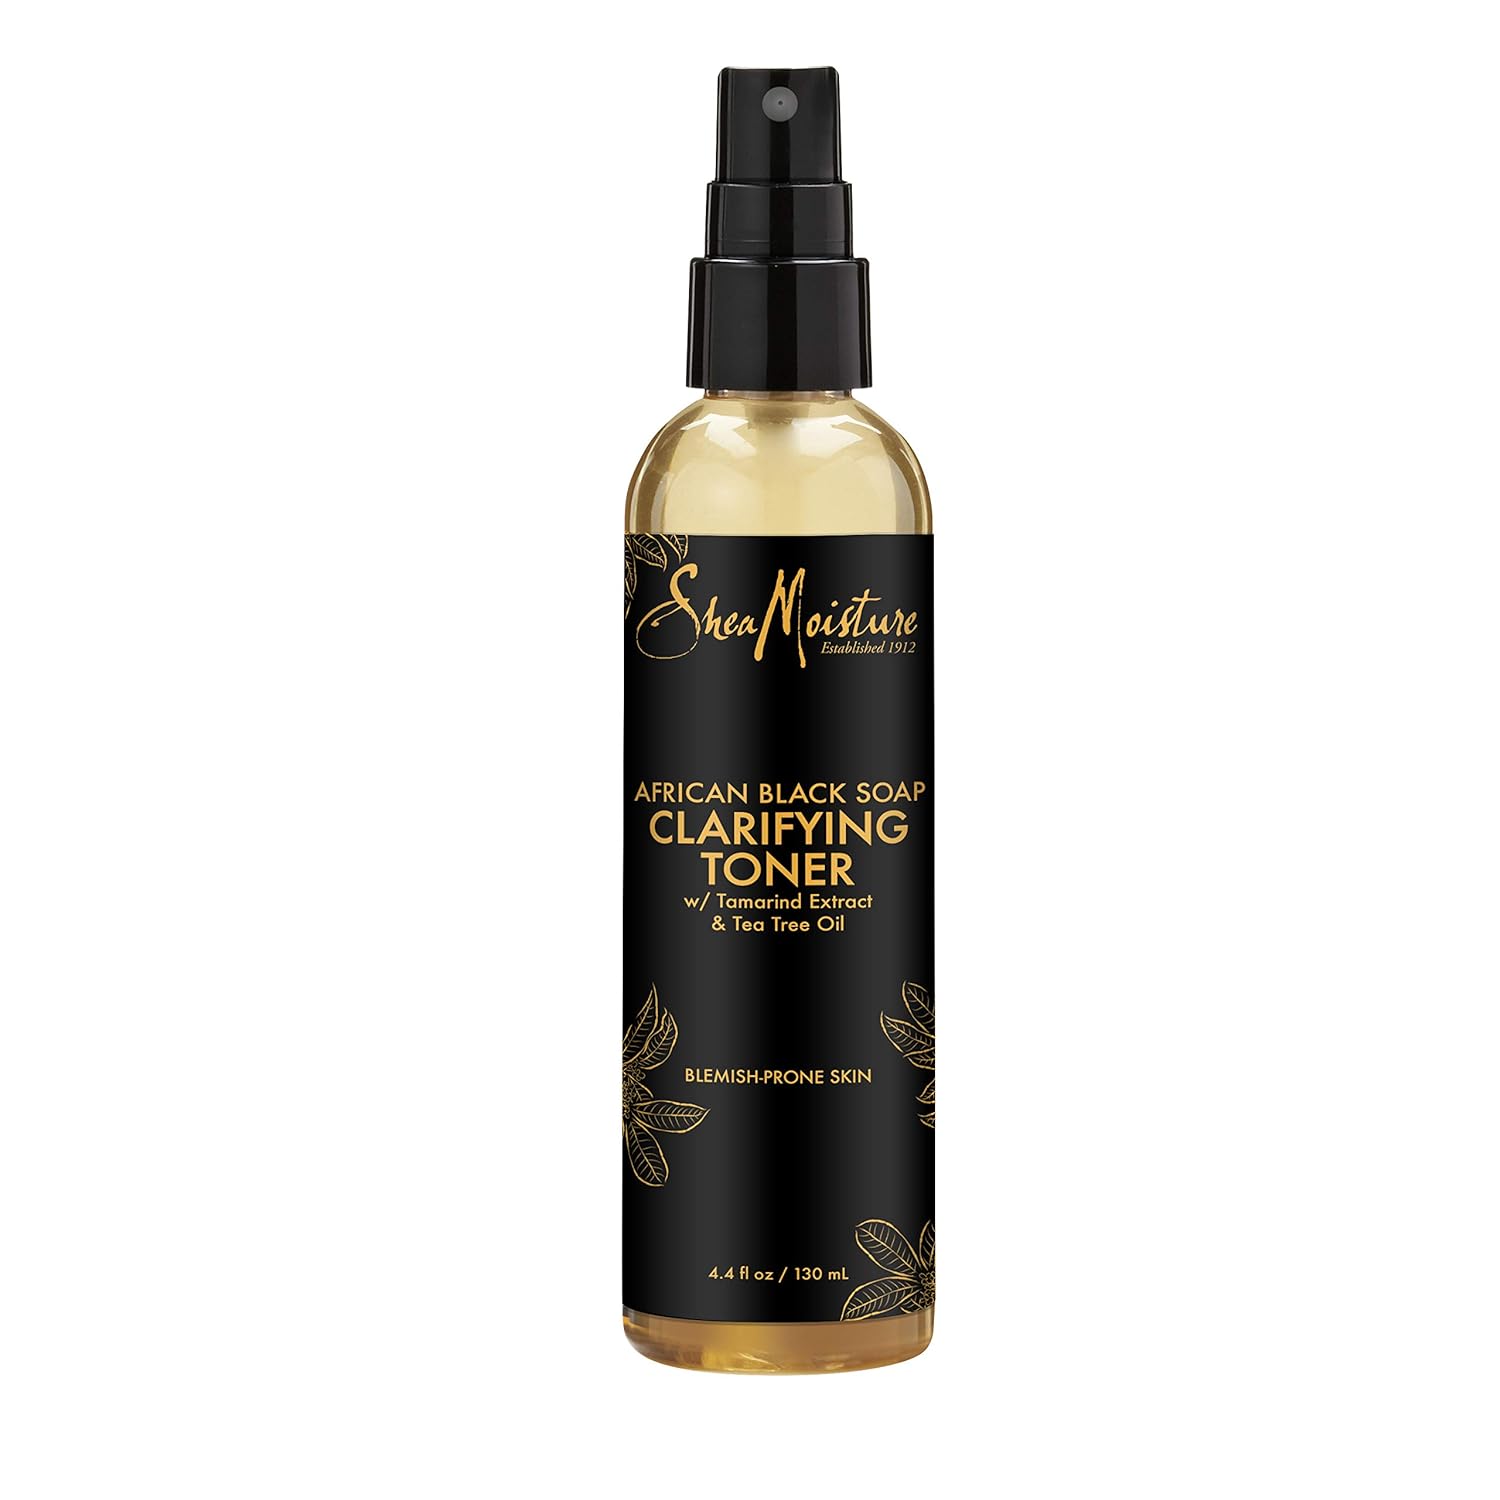 SheaMoisture Clarifying Toner for Problem Skin African Black Soap with Tea Tree Oil 4.4